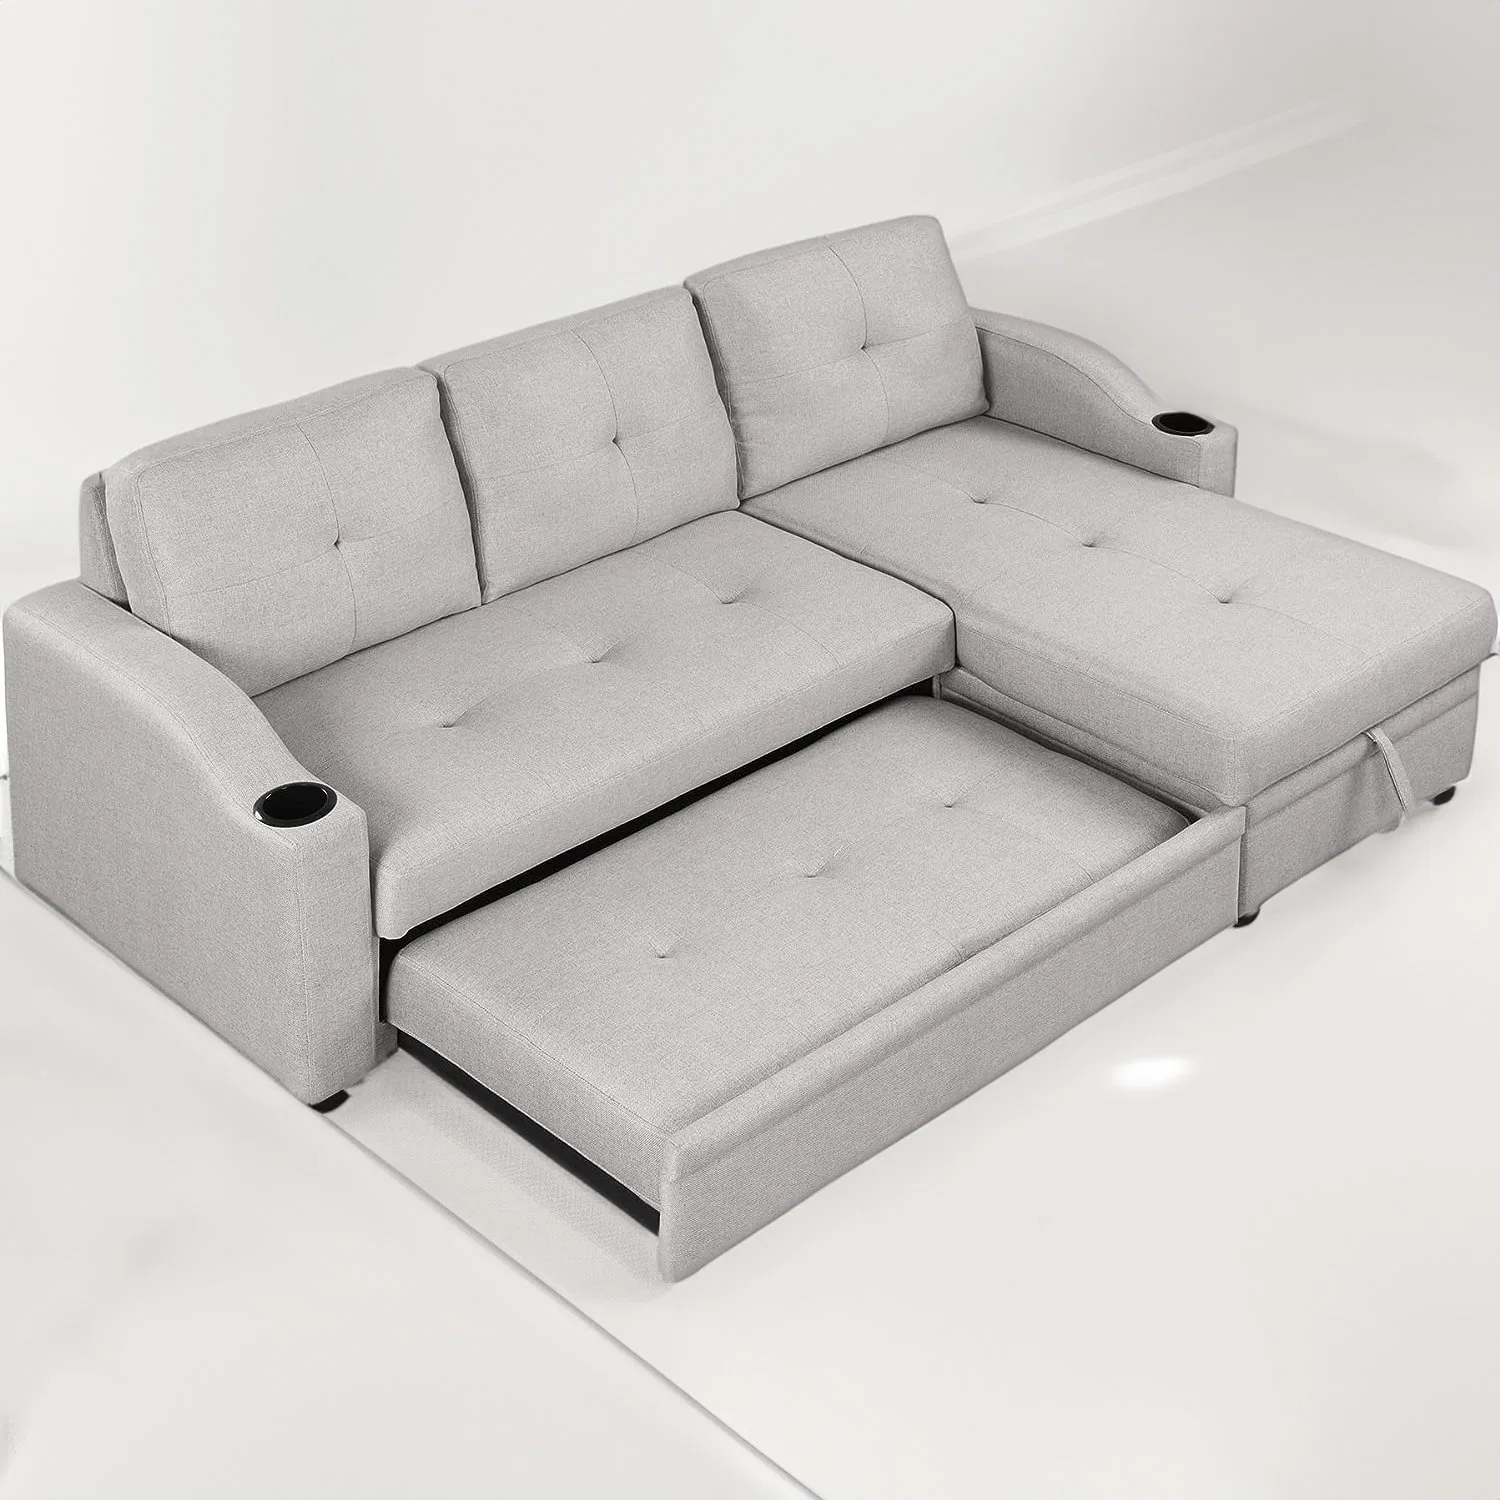 Manufacture Huayang Customized Living Room Furniture Furniture Functional Modern Folding Bed Sleeper Sofa Cum Bed